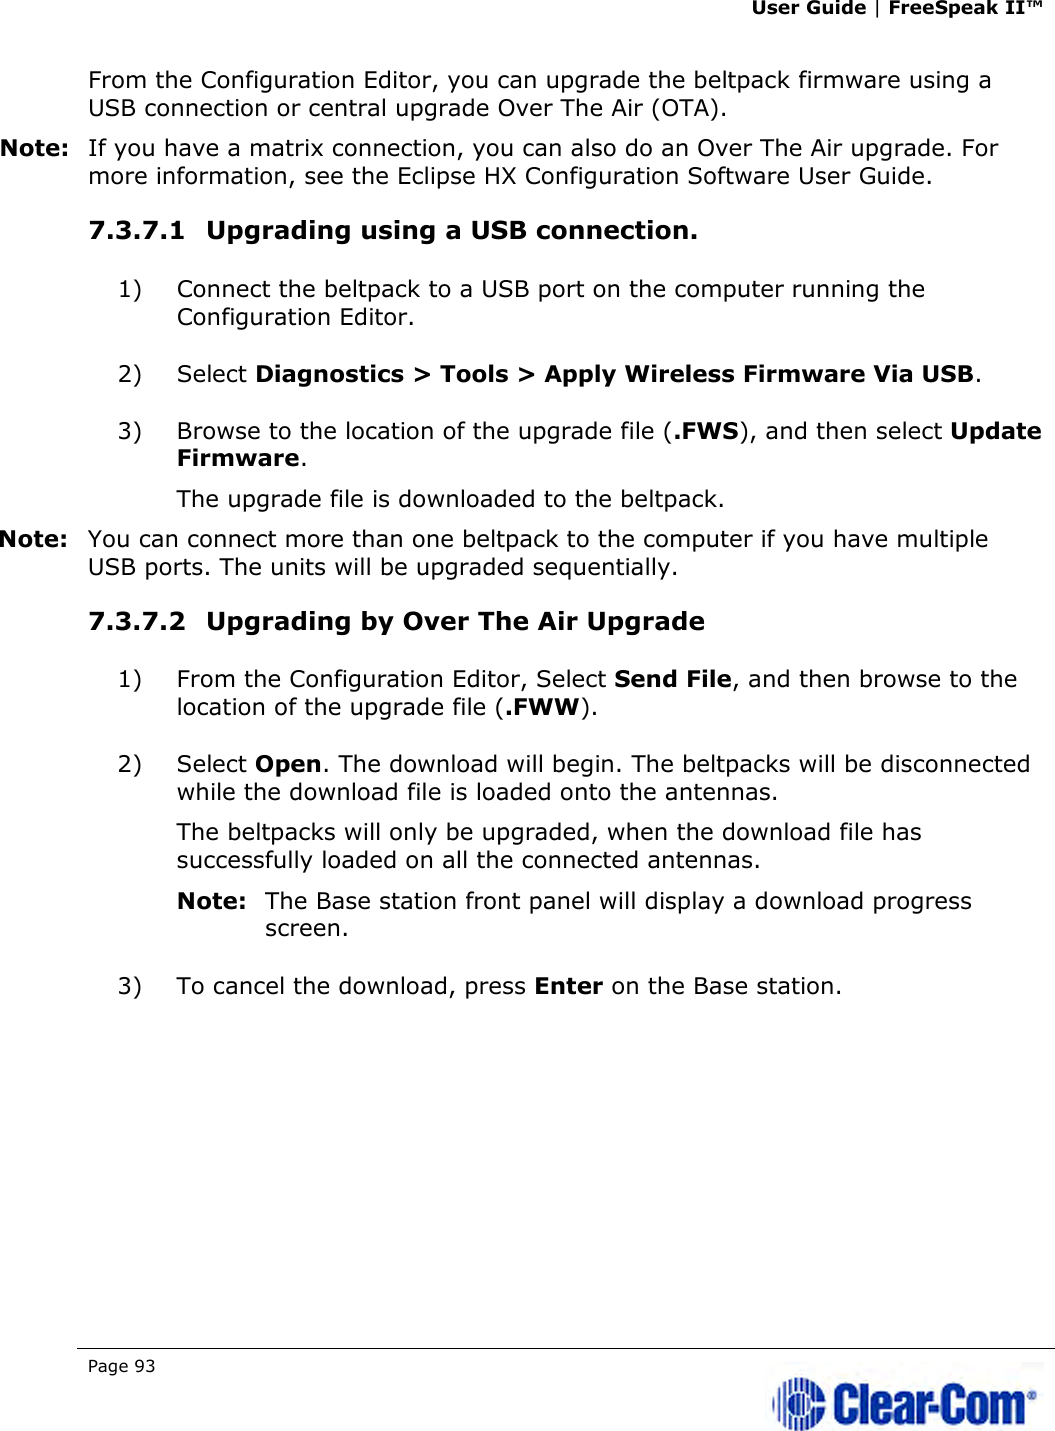 User Guide | FreeSpeak II™  Page 93   From the Configuration Editor, you can upgrade the beltpack firmware using a USB connection or central upgrade Over The Air (OTA). Note: If you have a matrix connection, you can also do an Over The Air upgrade. For more information, see the Eclipse HX Configuration Software User Guide. 7.3.7.1 Upgrading using a USB connection. 1) Connect the beltpack to a USB port on the computer running the Configuration Editor. 2) Select Diagnostics &gt; Tools &gt; Apply Wireless Firmware Via USB. 3) Browse to the location of the upgrade file (.FWS), and then select Update Firmware. The upgrade file is downloaded to the beltpack. Note: You can connect more than one beltpack to the computer if you have multiple USB ports. The units will be upgraded sequentially. 7.3.7.2 Upgrading by Over The Air Upgrade 1) From the Configuration Editor, Select Send File, and then browse to the location of the upgrade file (.FWW). 2) Select Open. The download will begin. The beltpacks will be disconnected while the download file is loaded onto the antennas. The beltpacks will only be upgraded, when the download file has successfully loaded on all the connected antennas.  Note: The Base station front panel will display a download progress screen. 3) To cancel the download, press Enter on the Base station. 